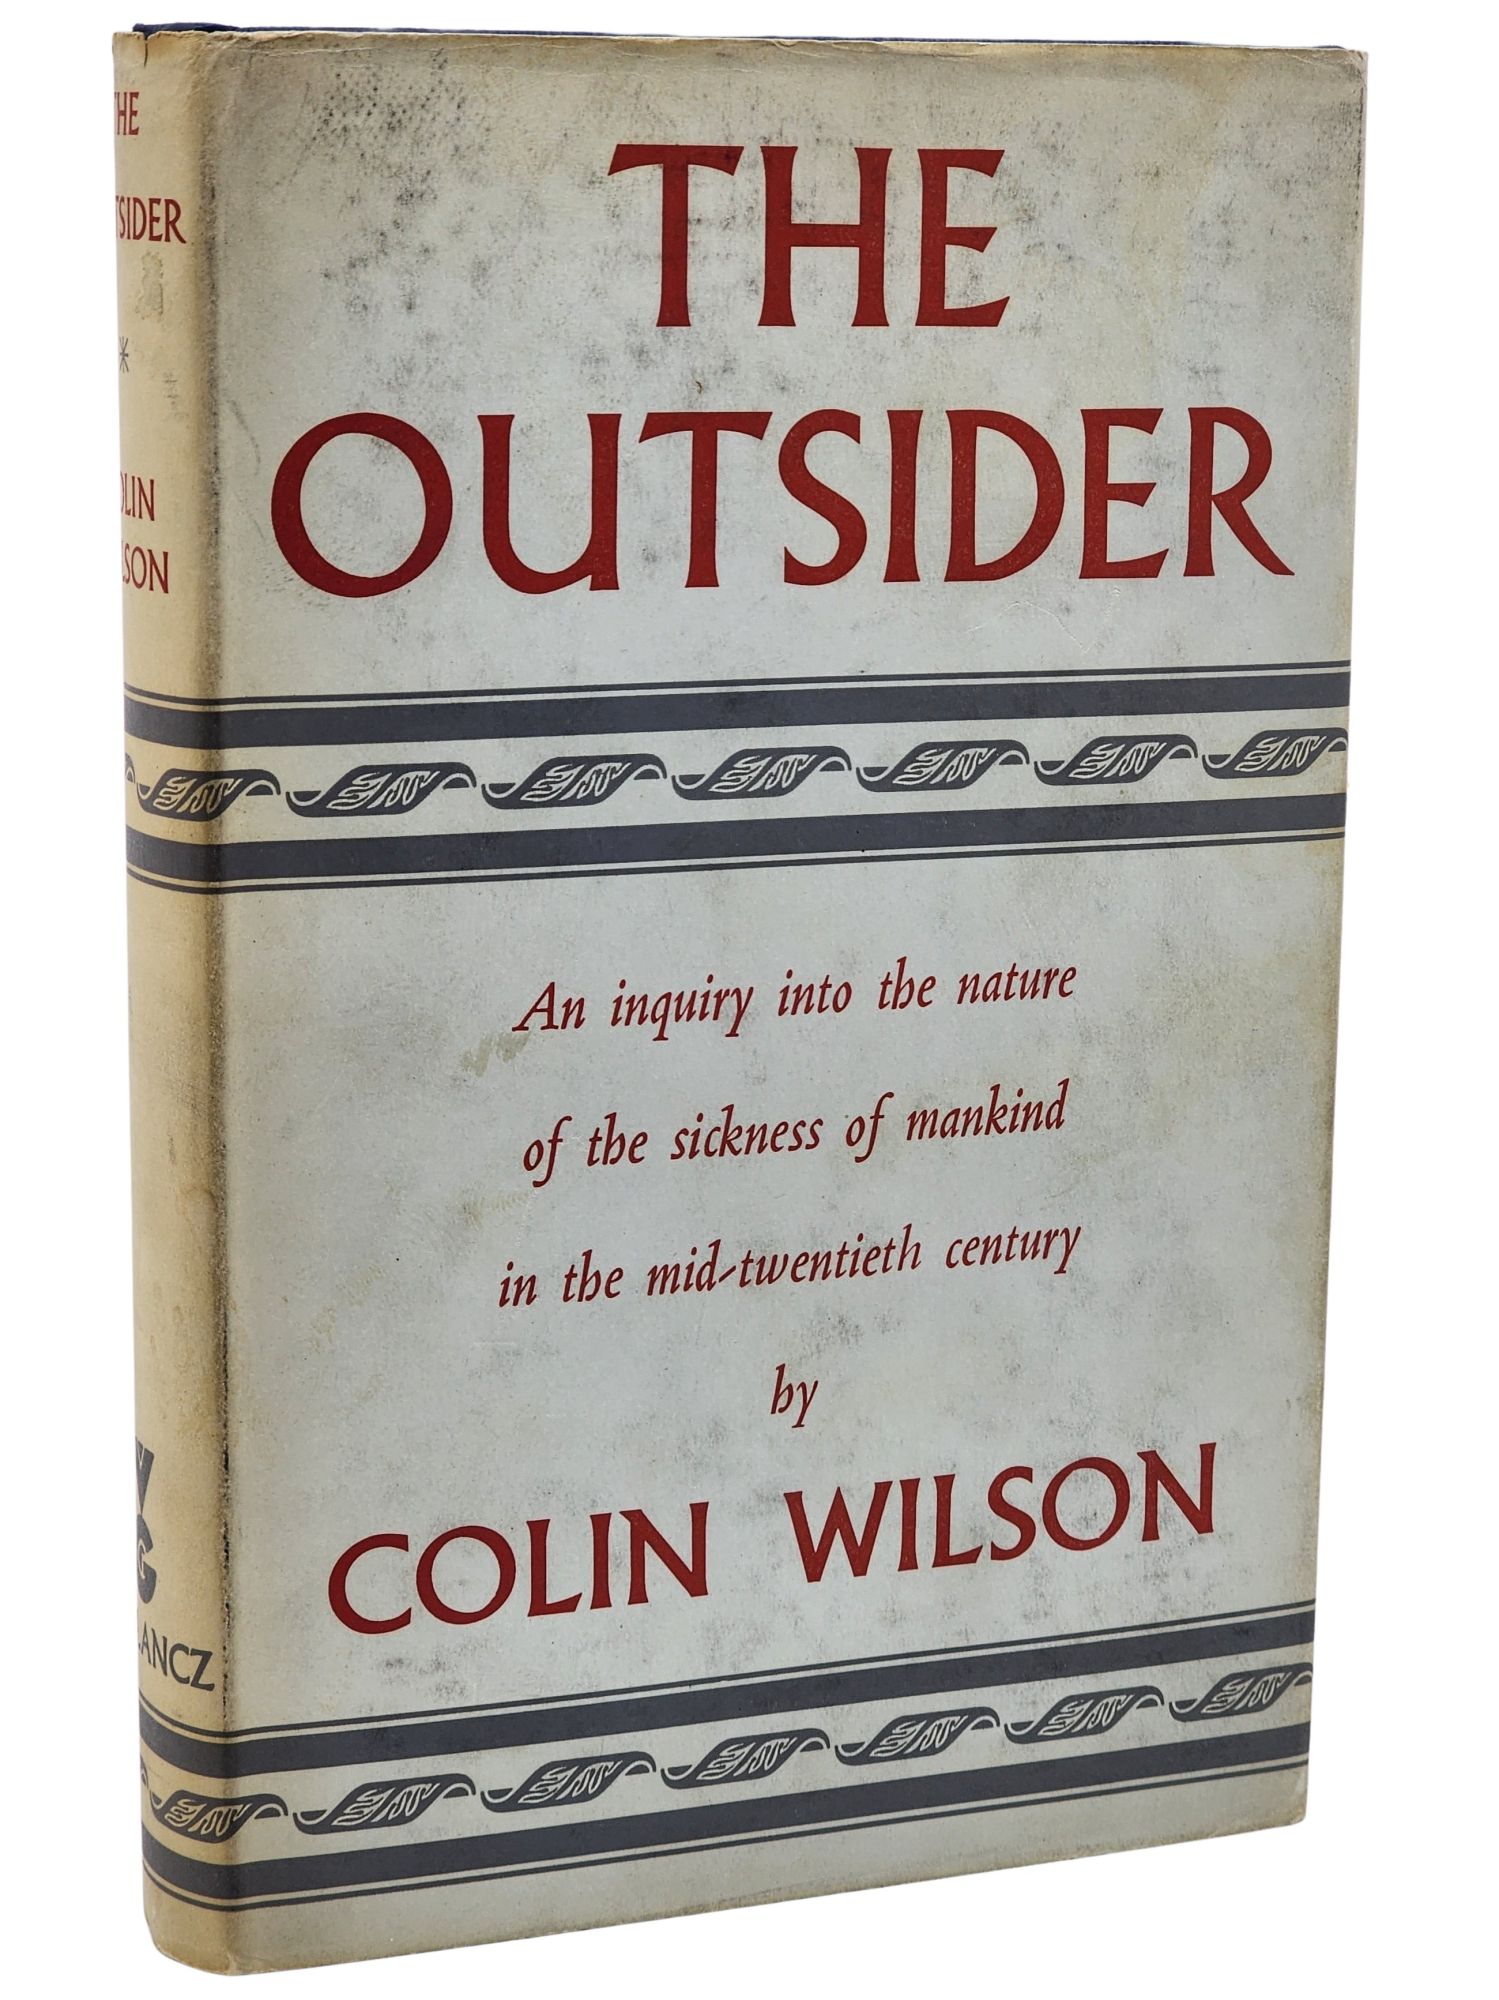 [Book #50819] THE OUTSIDER. Colin Wilson.